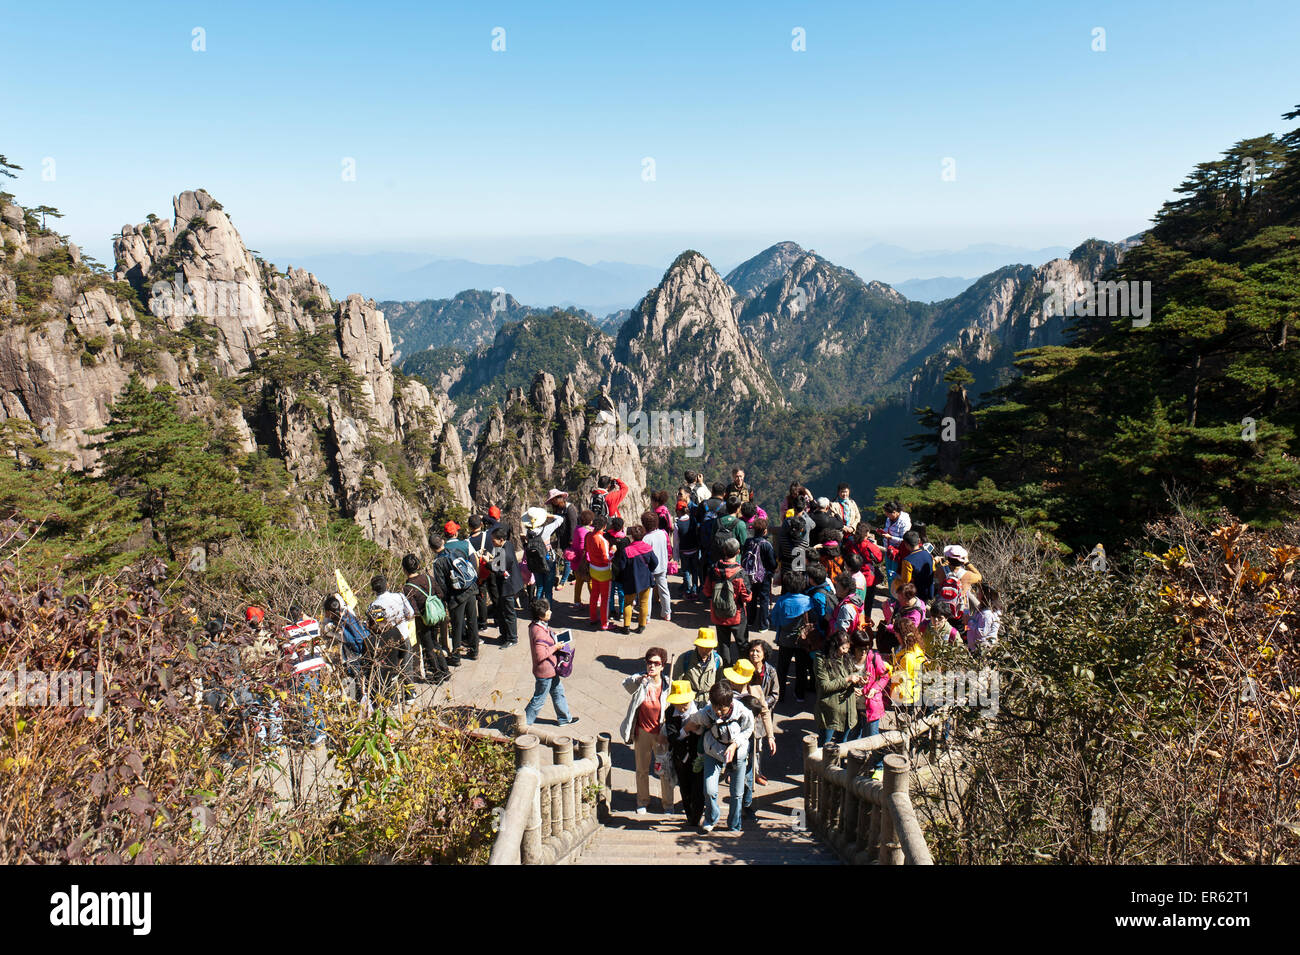 Chinese tourists at the viewpoint, rocky mountains, Mount Huangshan, Huang Shan, Anhui Province, China Stock Photo